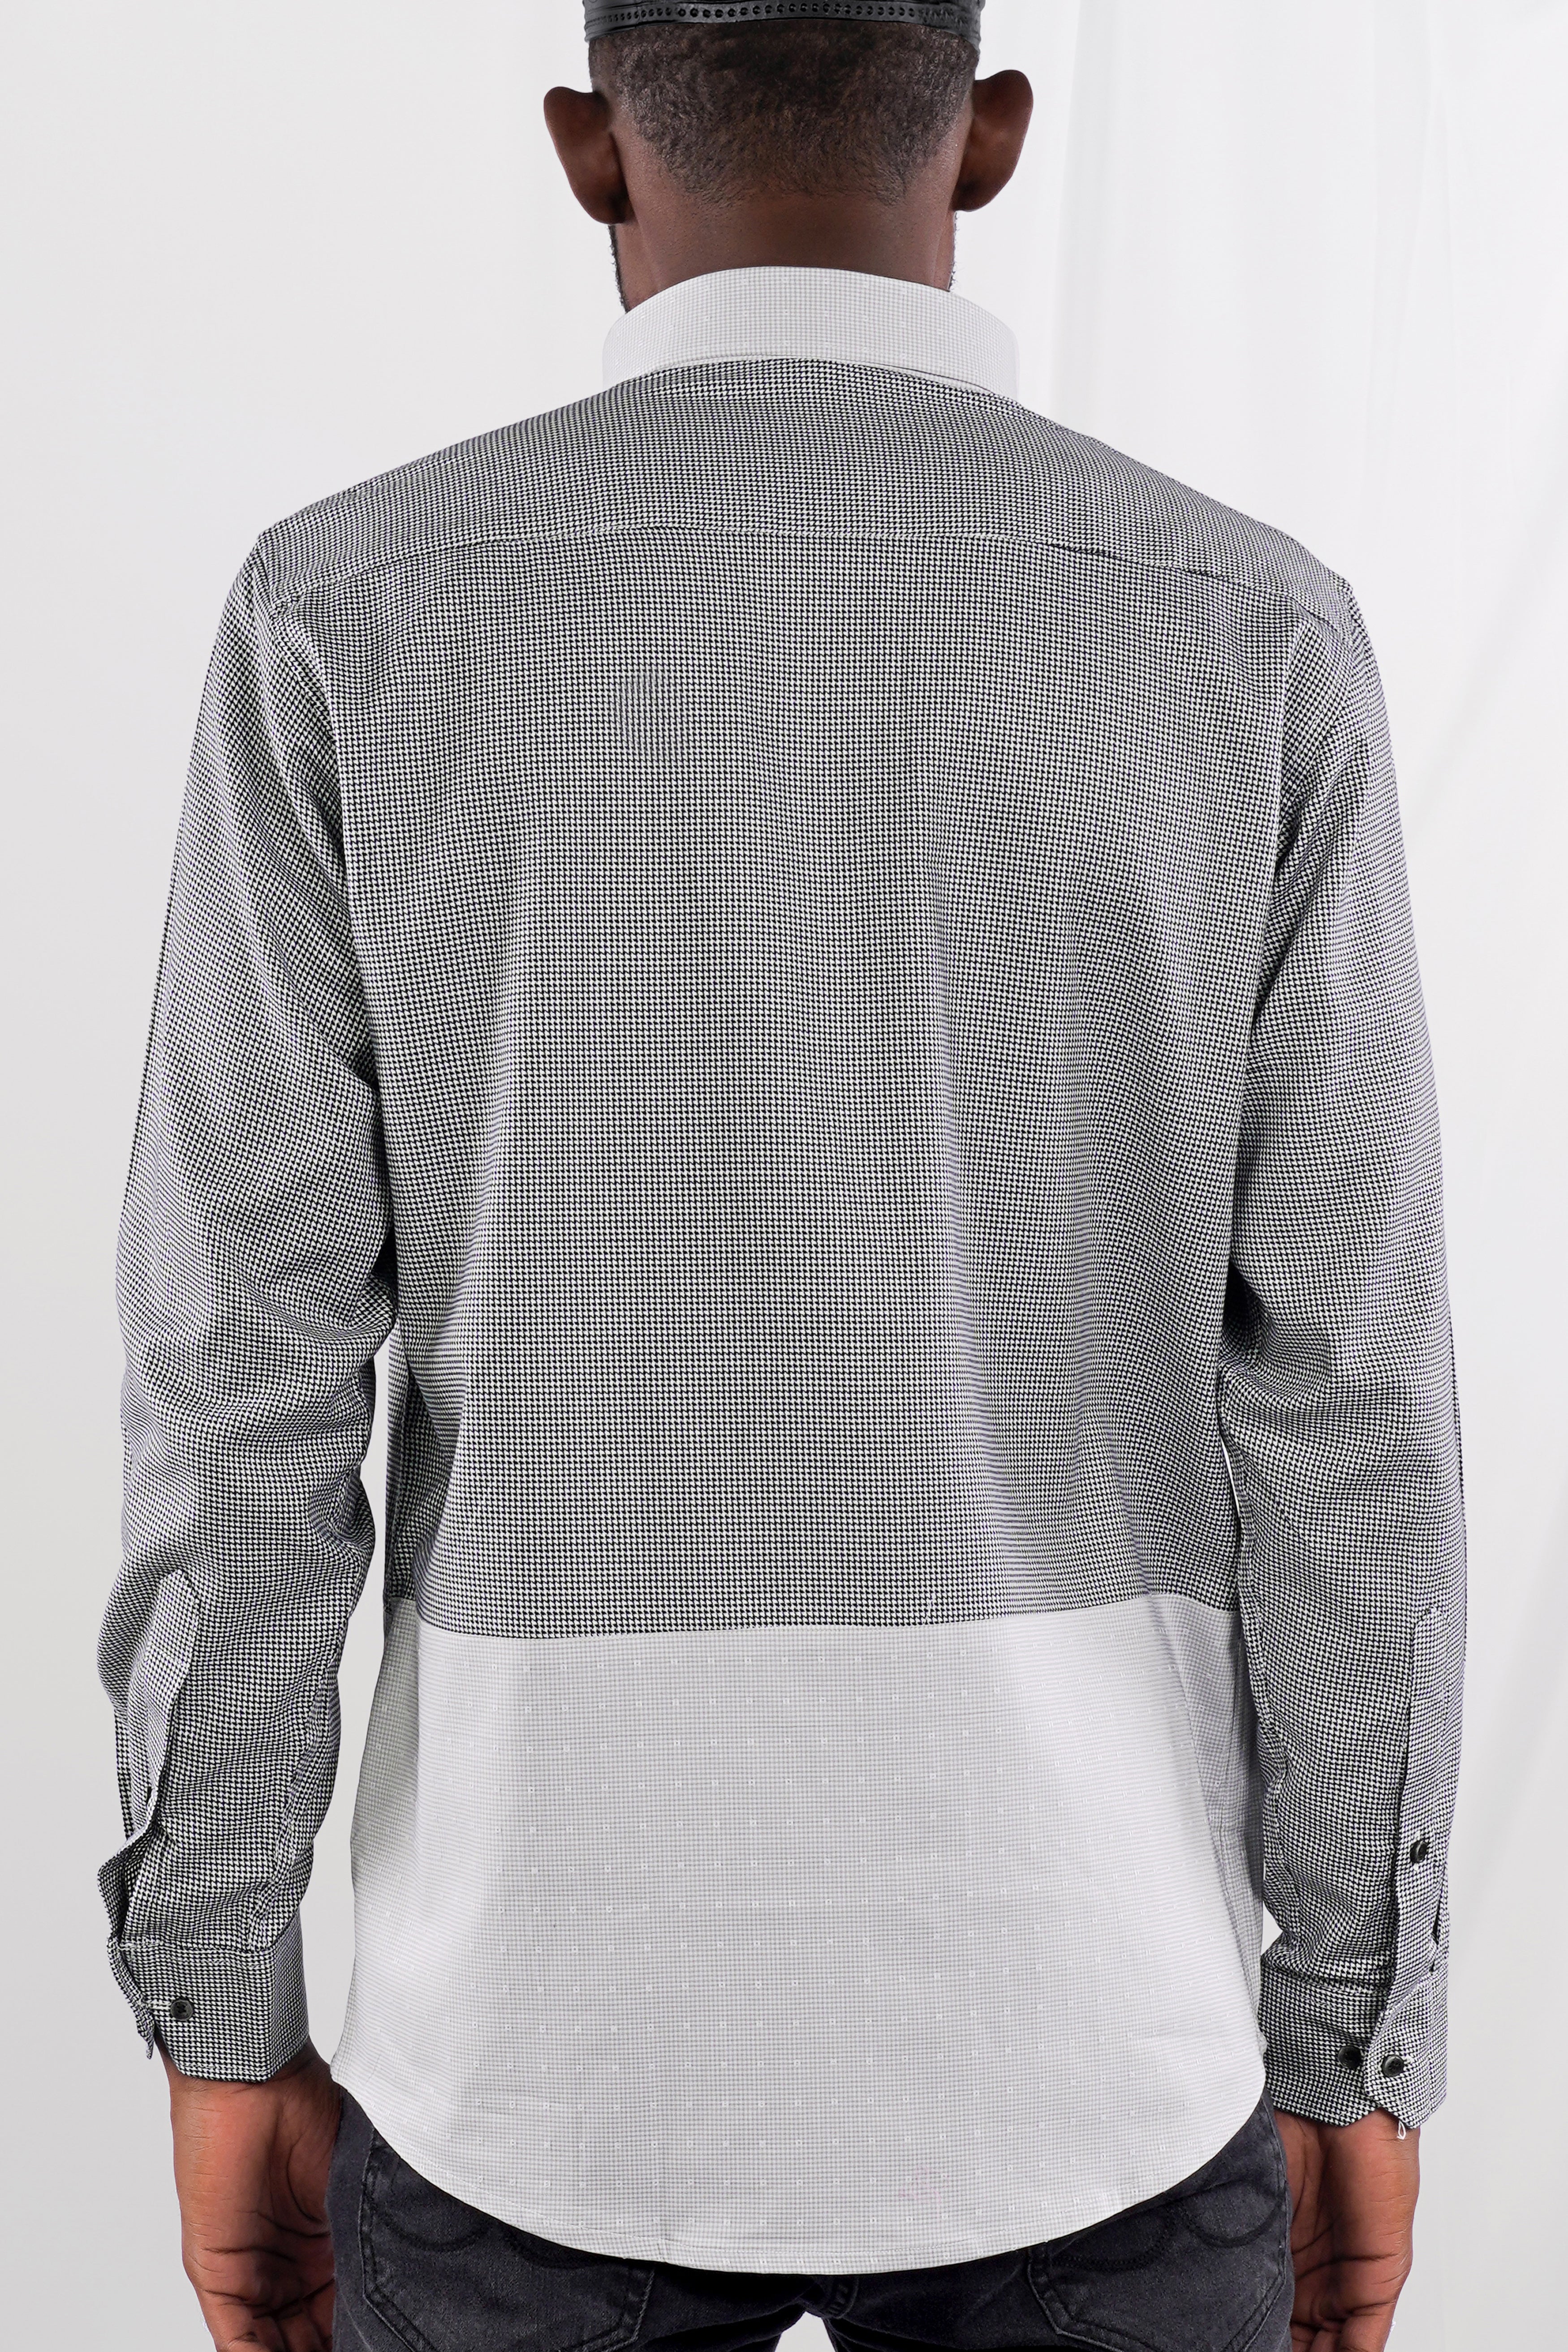 Outer Space Gray with Bright White Half and Half Houndstooth Textured Designer Shirt